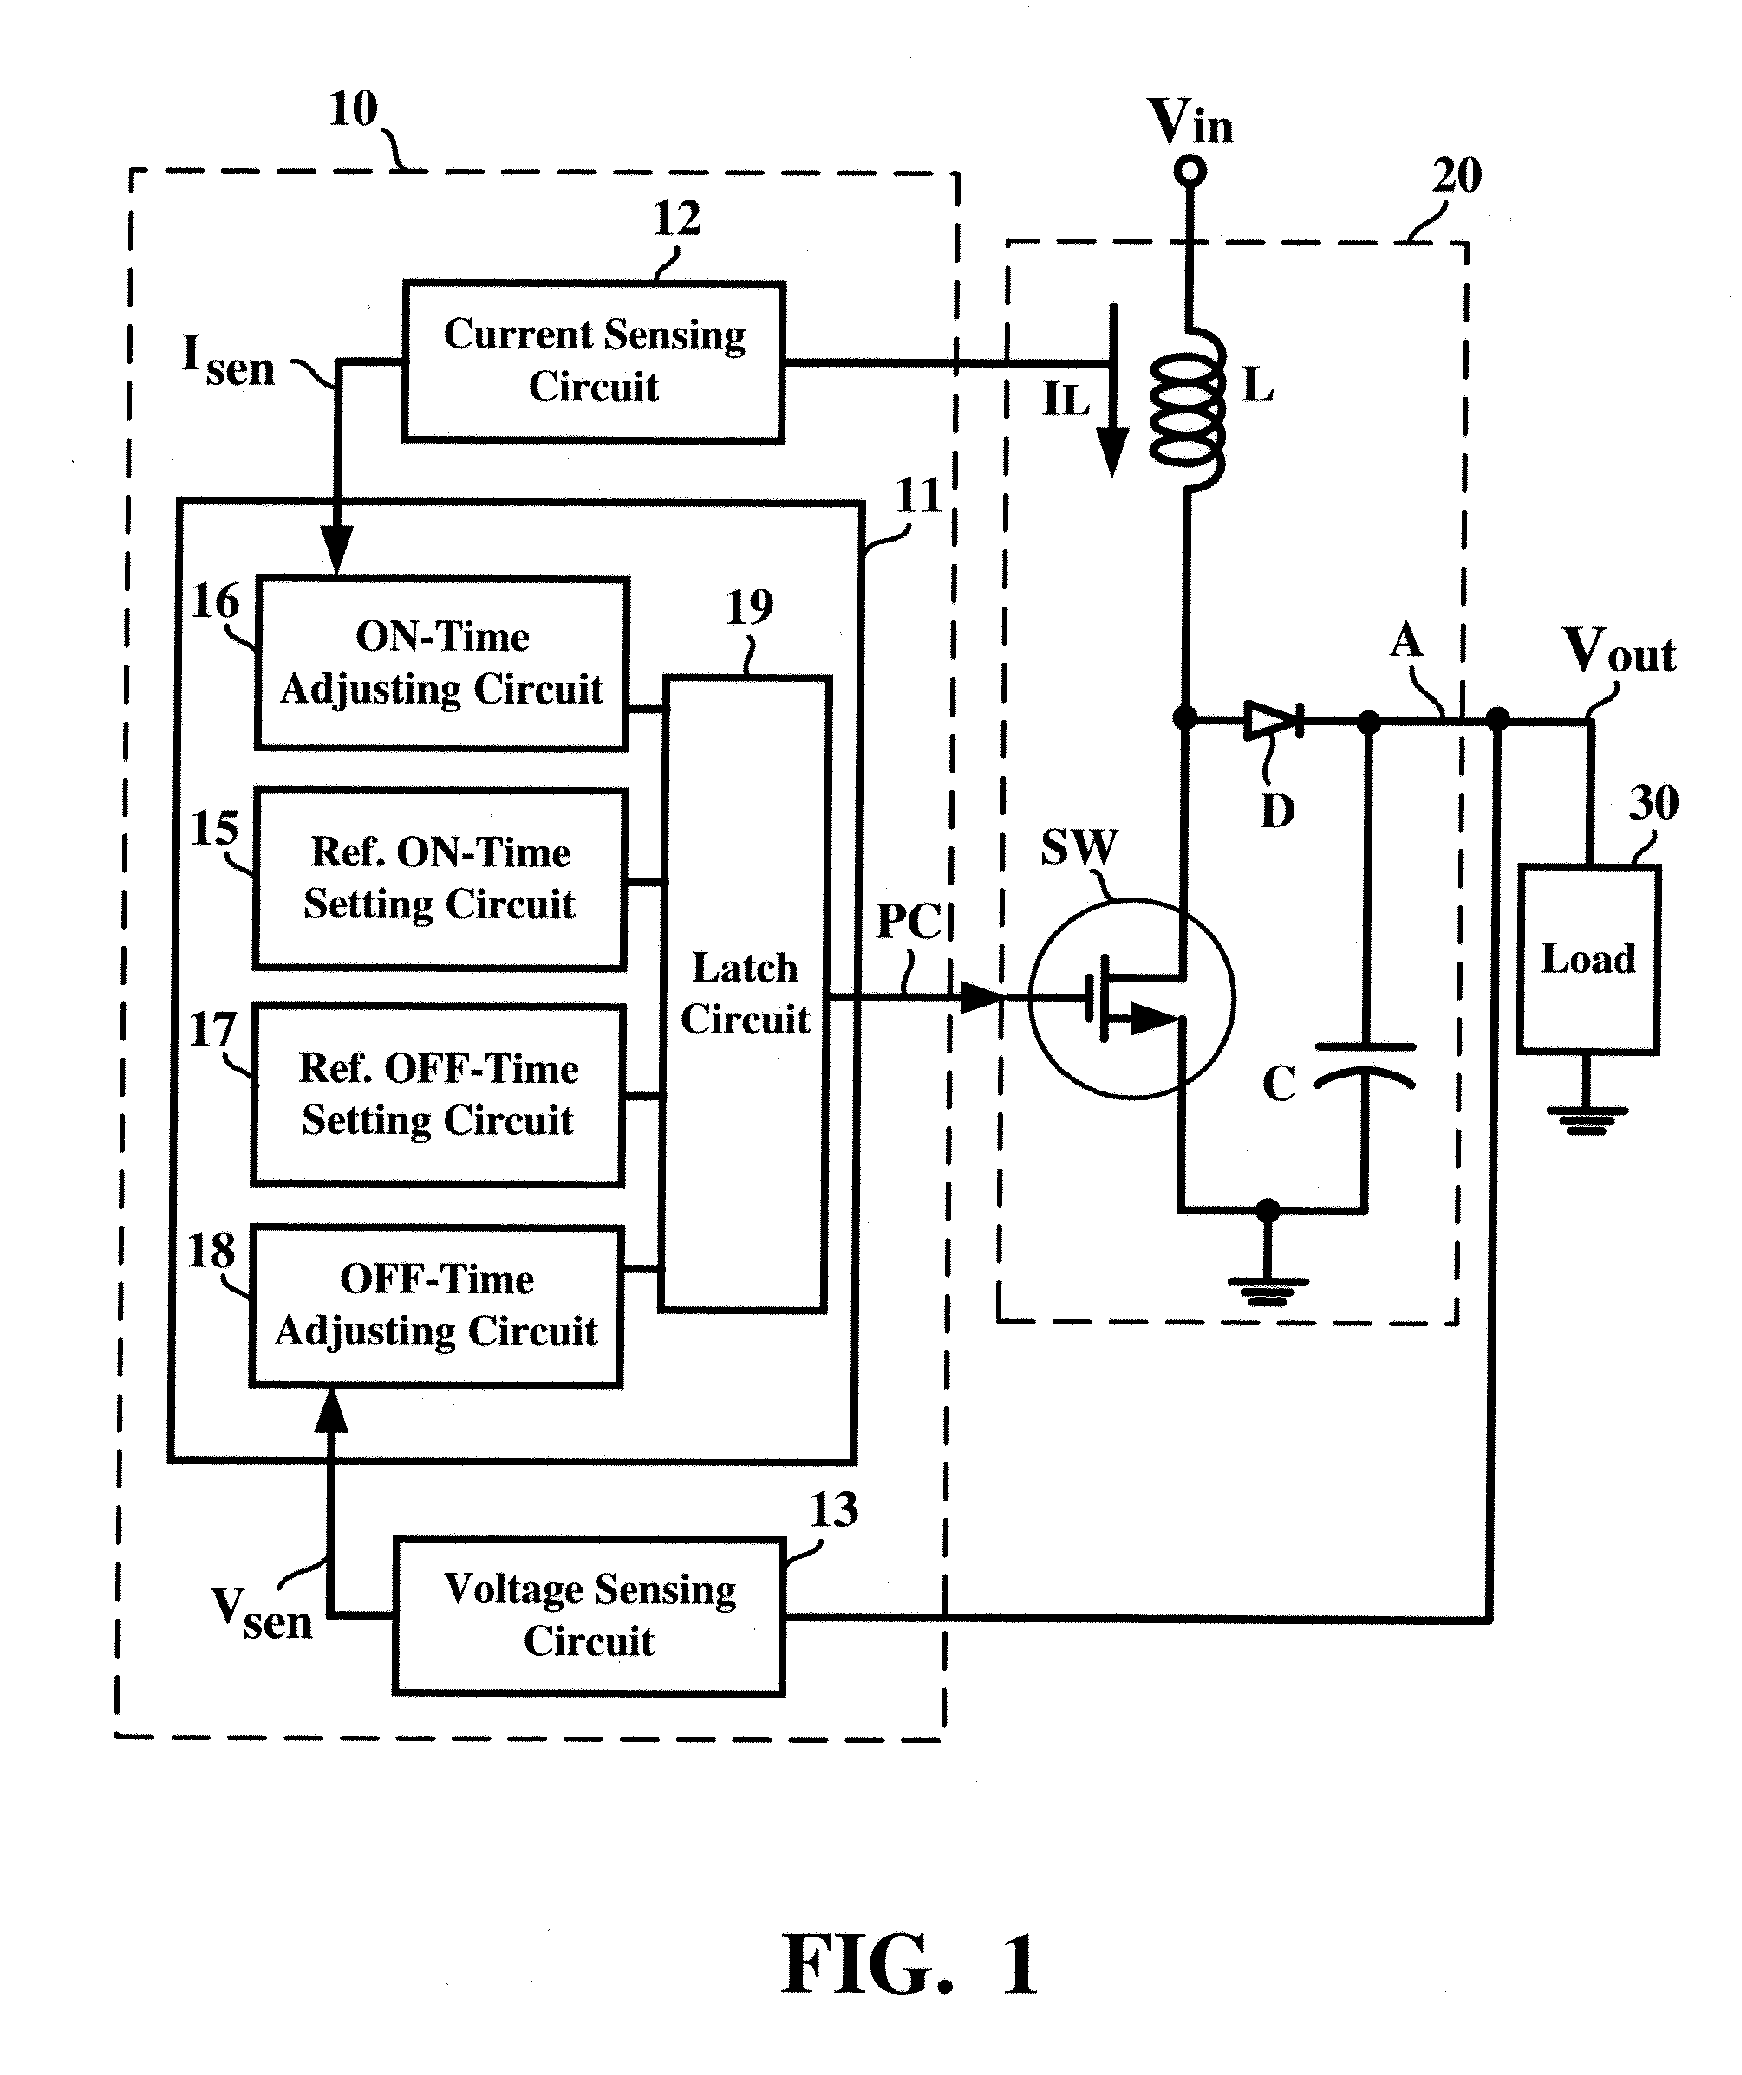 PFM control circuit for converting voltages with high efficiency over broad loading requirements